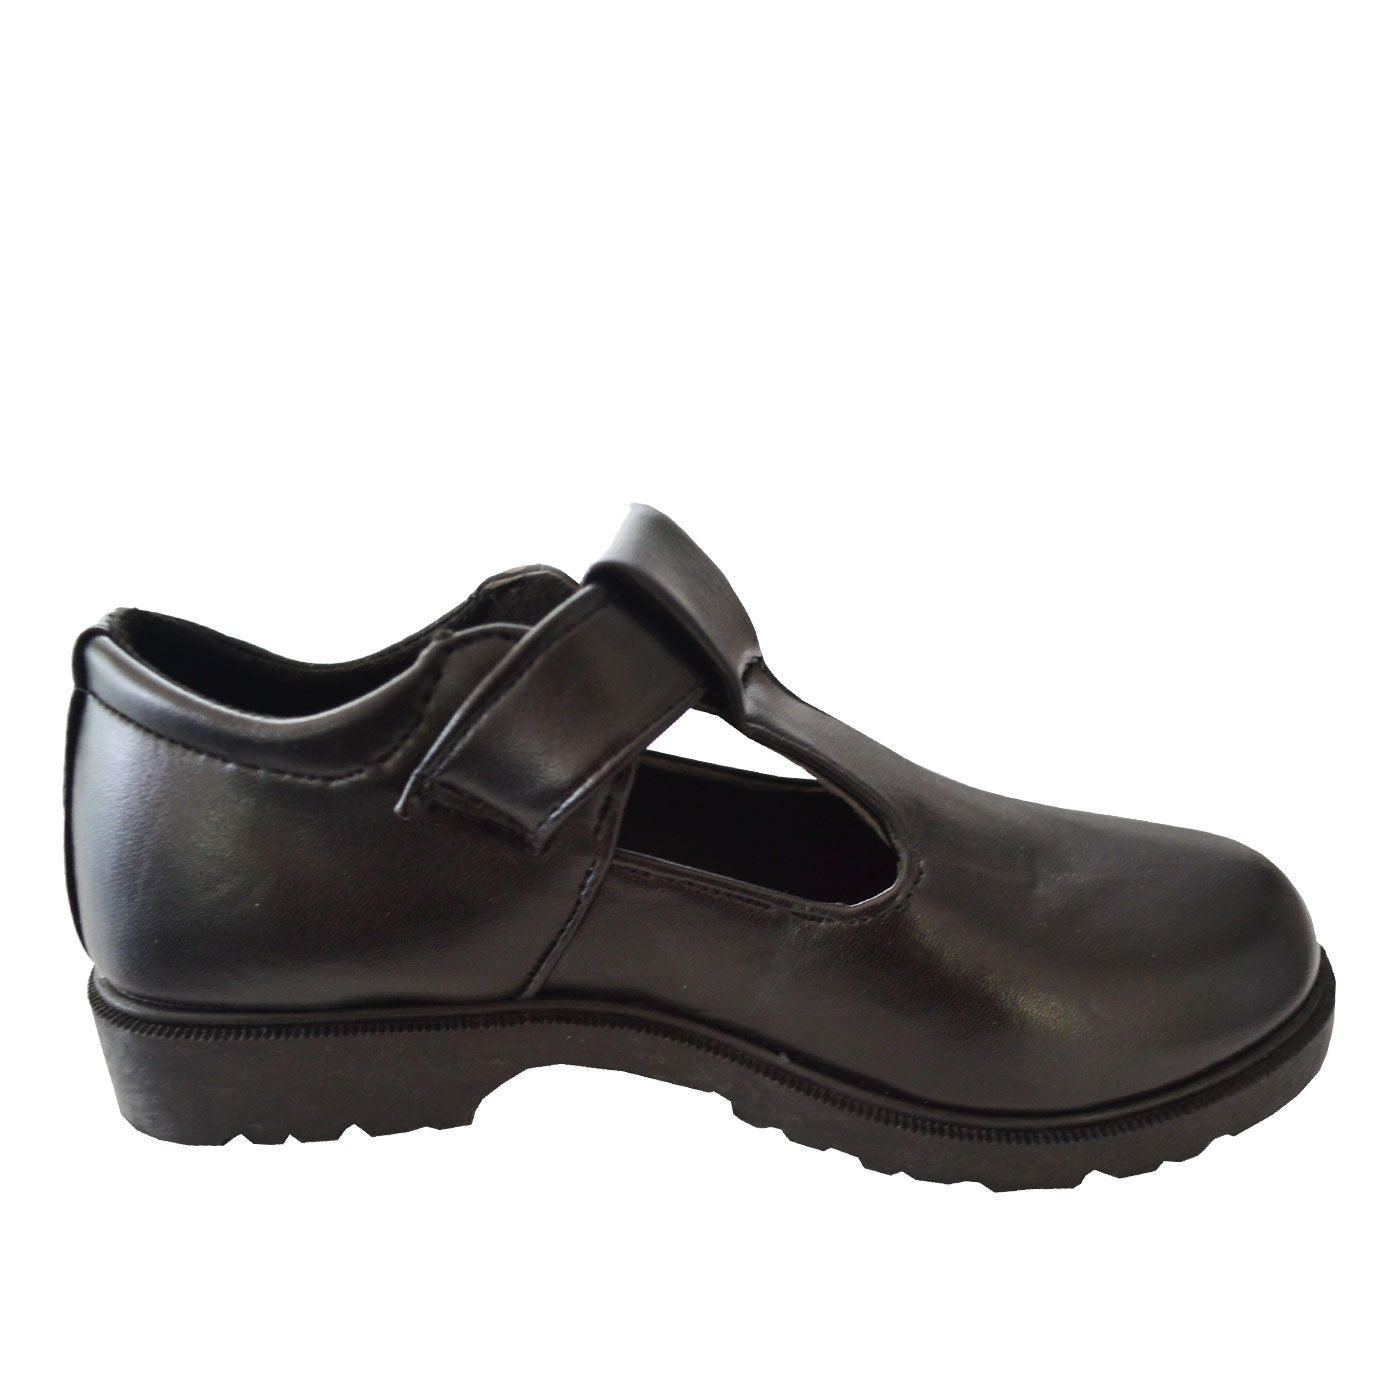 School Shoes for Girls with Buckle